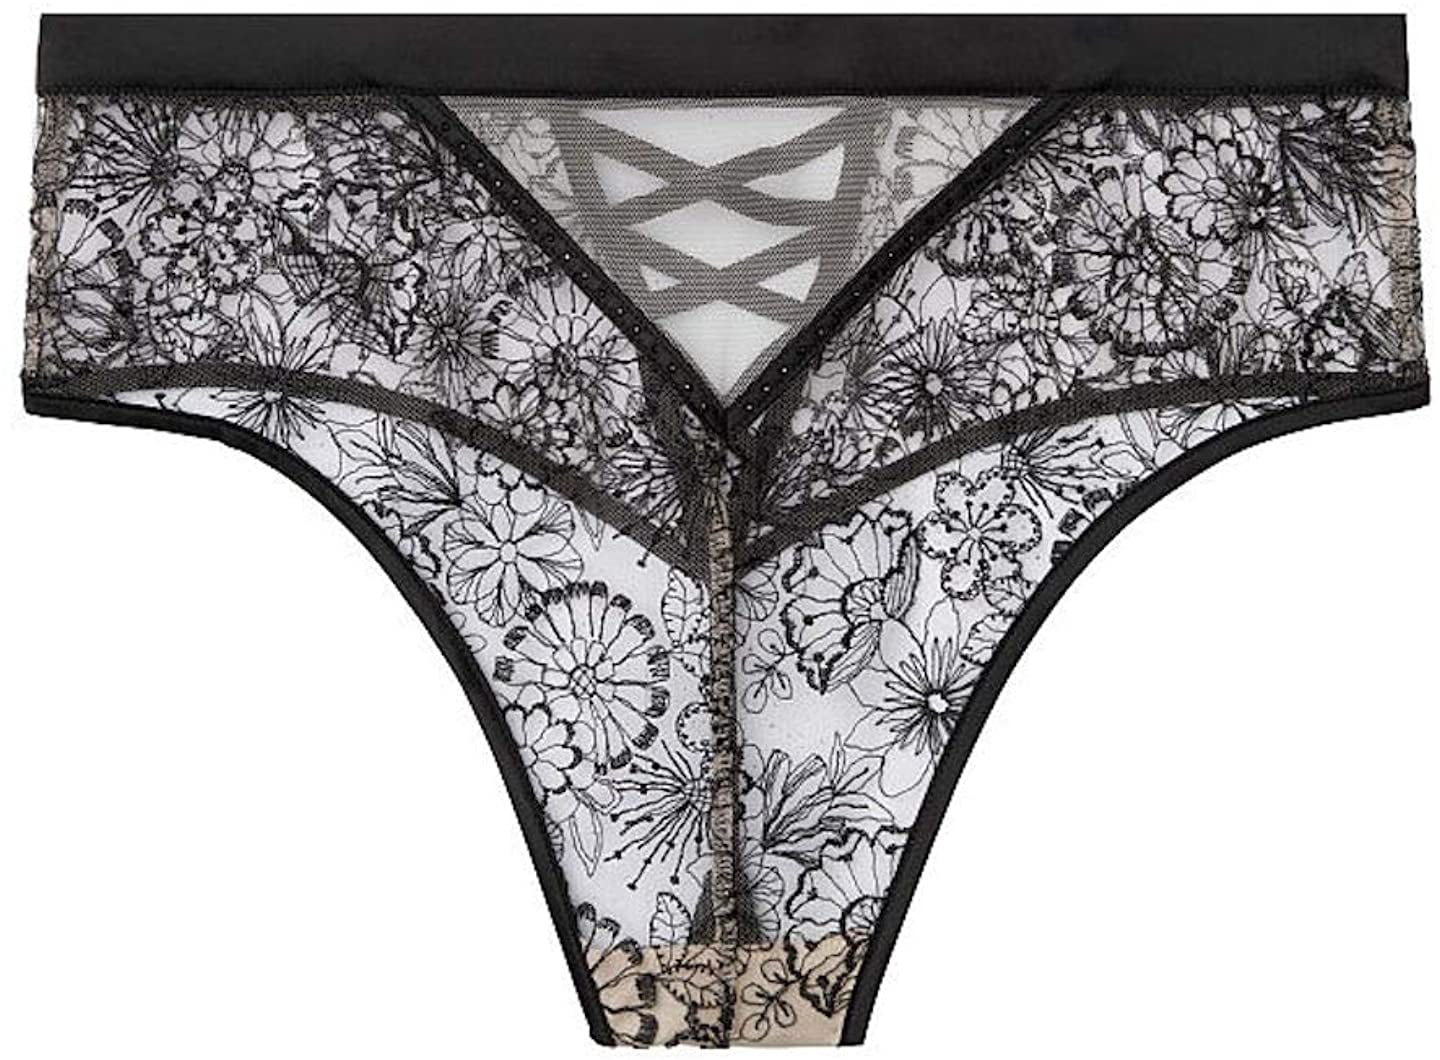 Details about   NWT*VICTORIA’S SECRET LUXE LINGERIE Embroidered Thong Panty**XS S M XL L